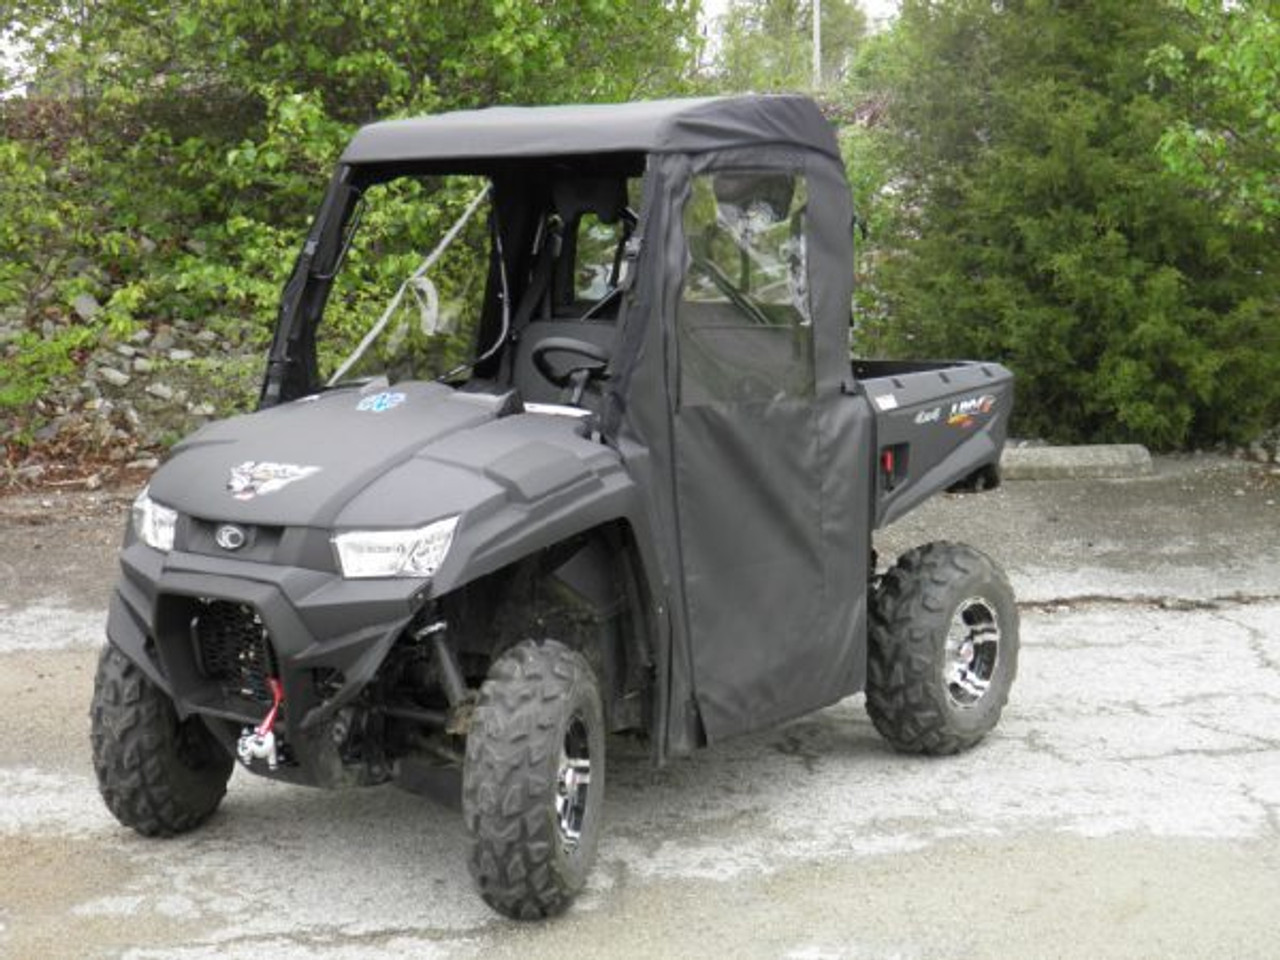 Kymco UXV 450i Full Cab Enclosure for Hard Windshield front and side angle view